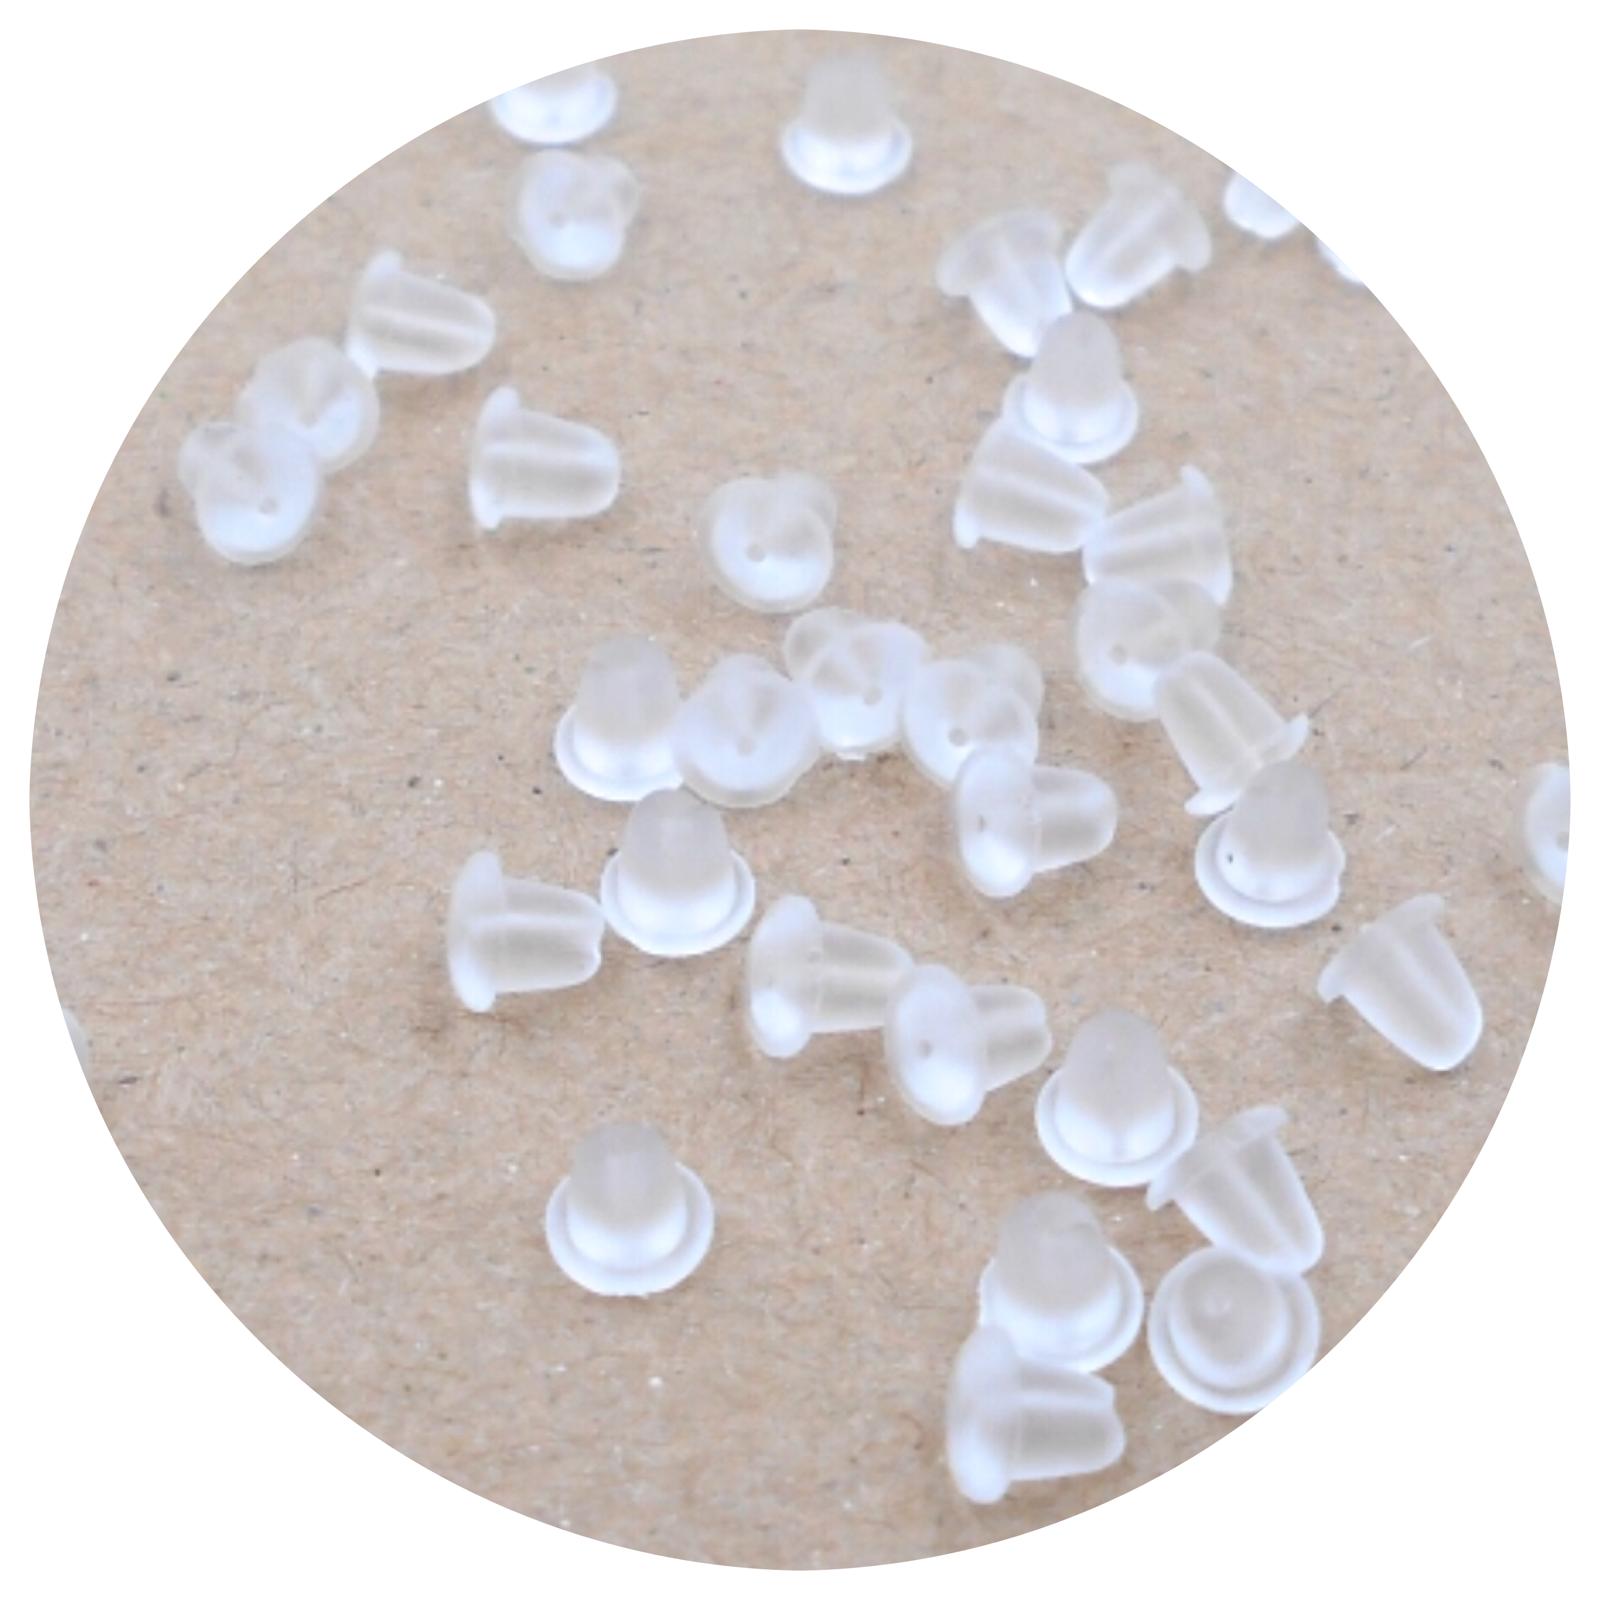 DIYear Clear Silicone Earring Backs - 150 Pcs / 75 Pairs Hypoallergenic  Secure Push-Back Earring Stoppers for Stud Earrings, 10x6mm Ful